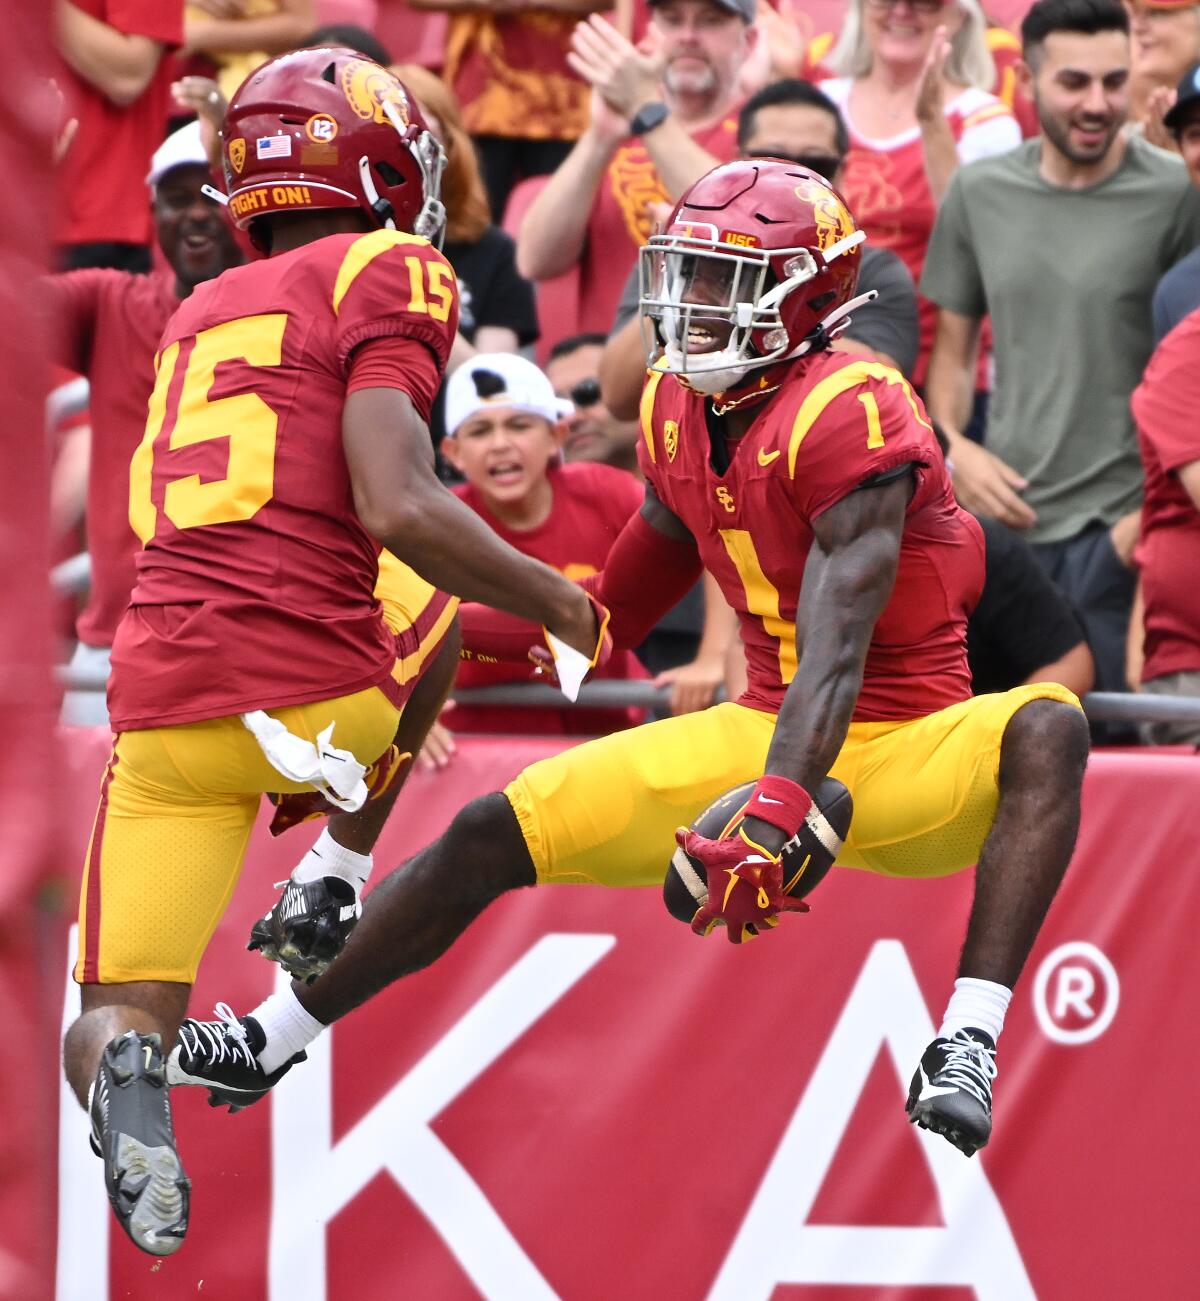 USC wide receiver Zachariah Branch celebrates with teammate Dorian Singer after making a touchdown catch.